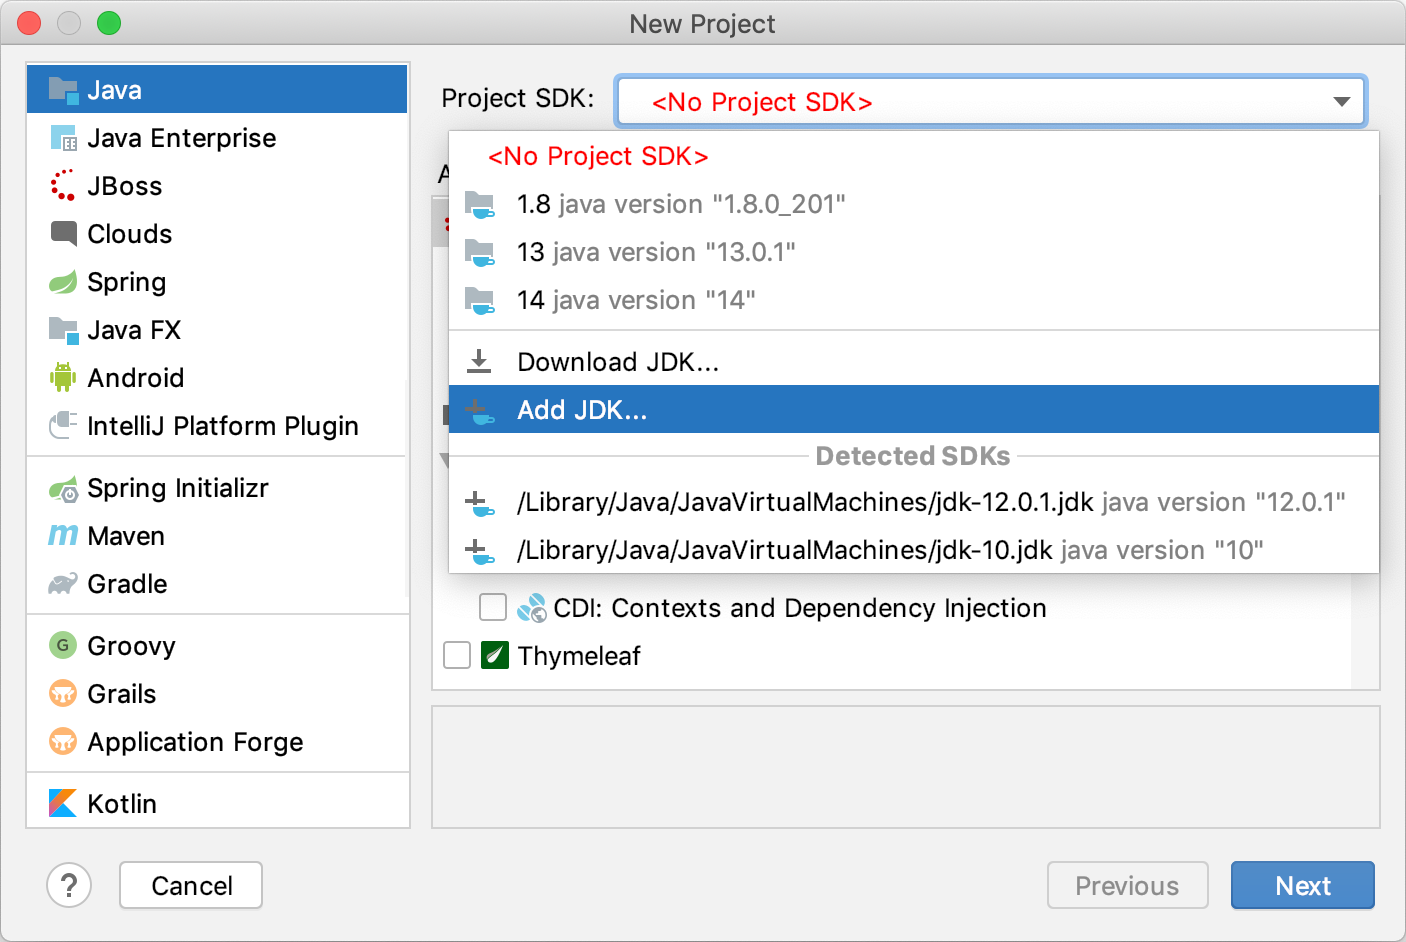 Creating the new project and adding the JDK